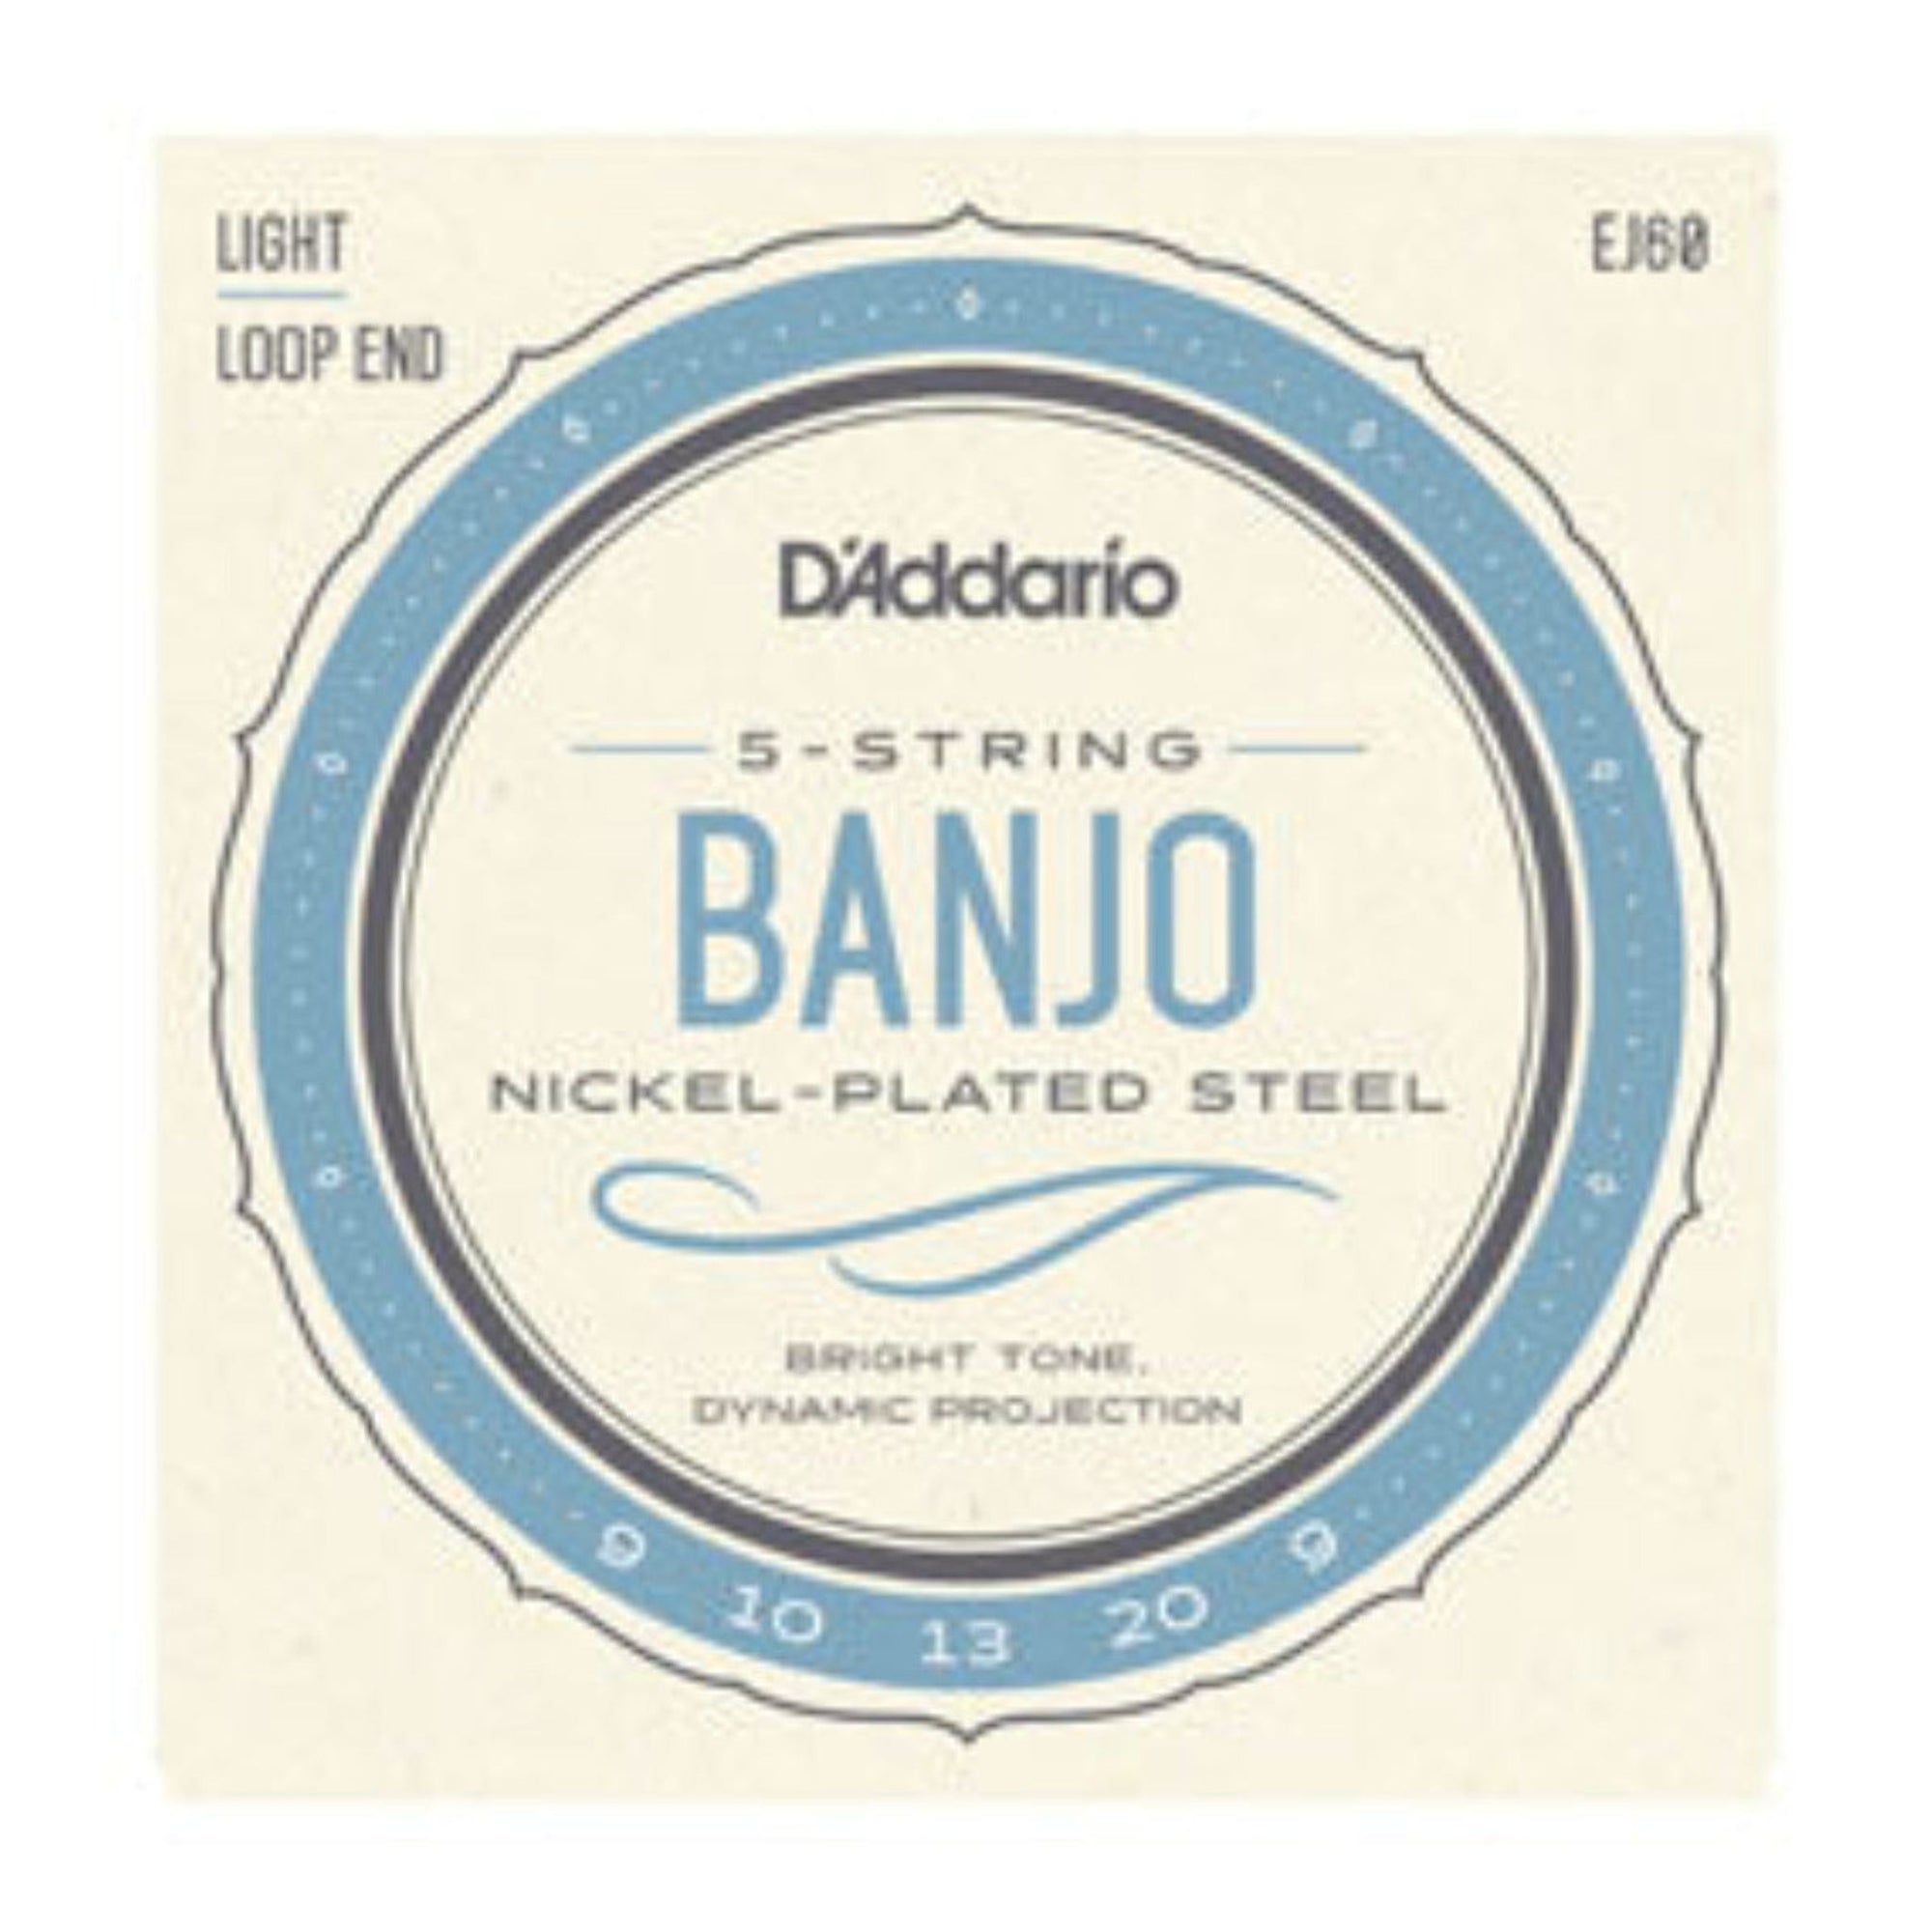 EJ60, one D'Addario's best selling 5-string banjo sets, offers light playing tension for comfortable playing feel and brilliant tone.